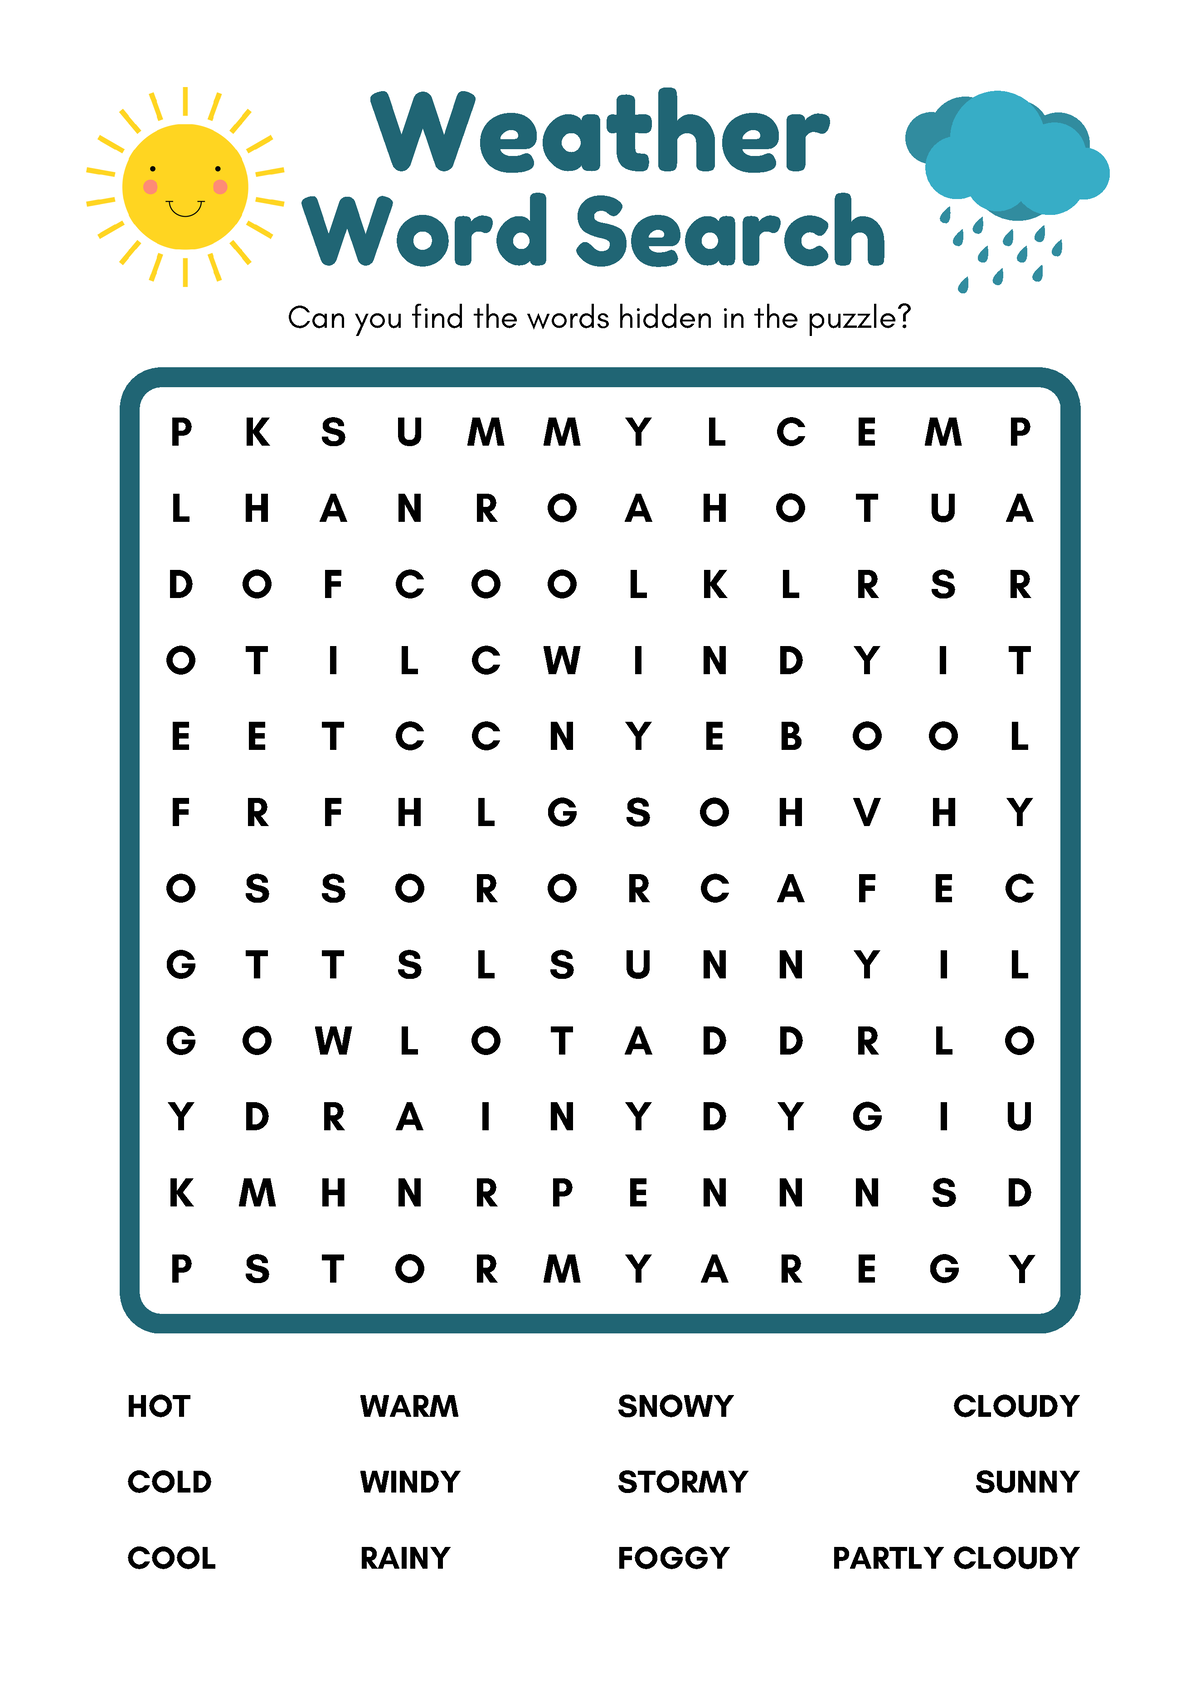 Weather Word Search - qweqweqwee - Weather Word Search COOL RAINY COLD ...